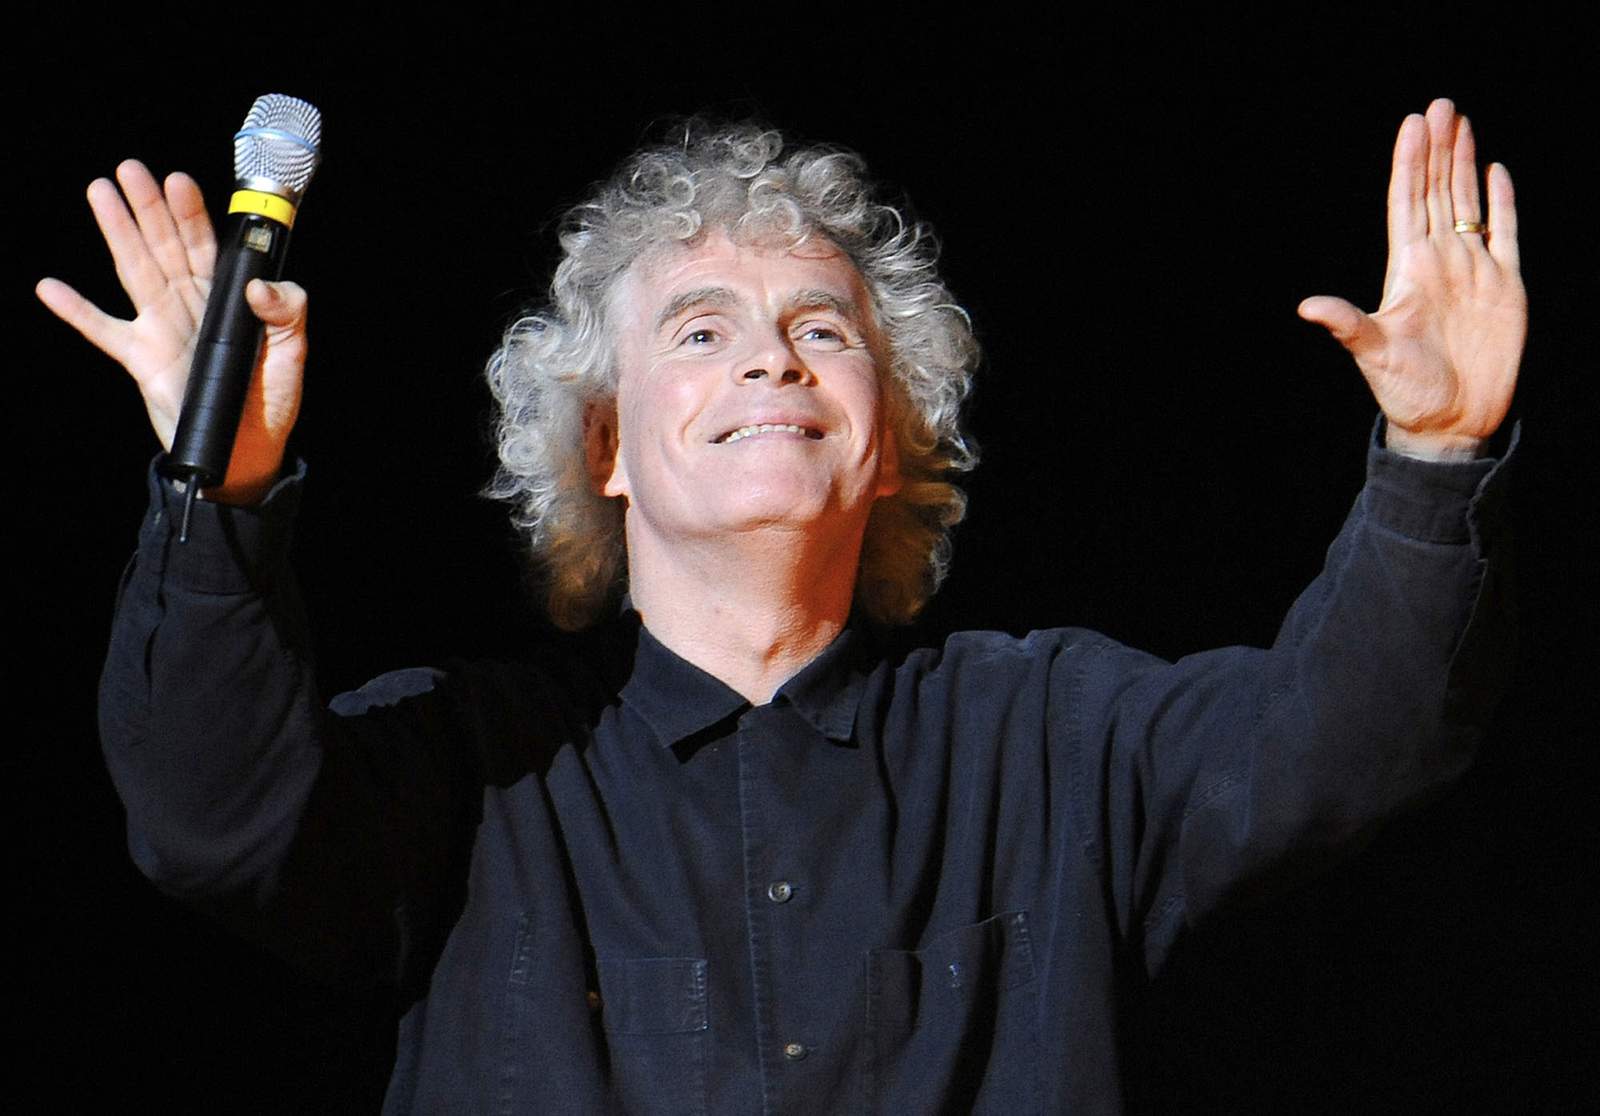 Conductor Simon Rattle to leave London post for Munich